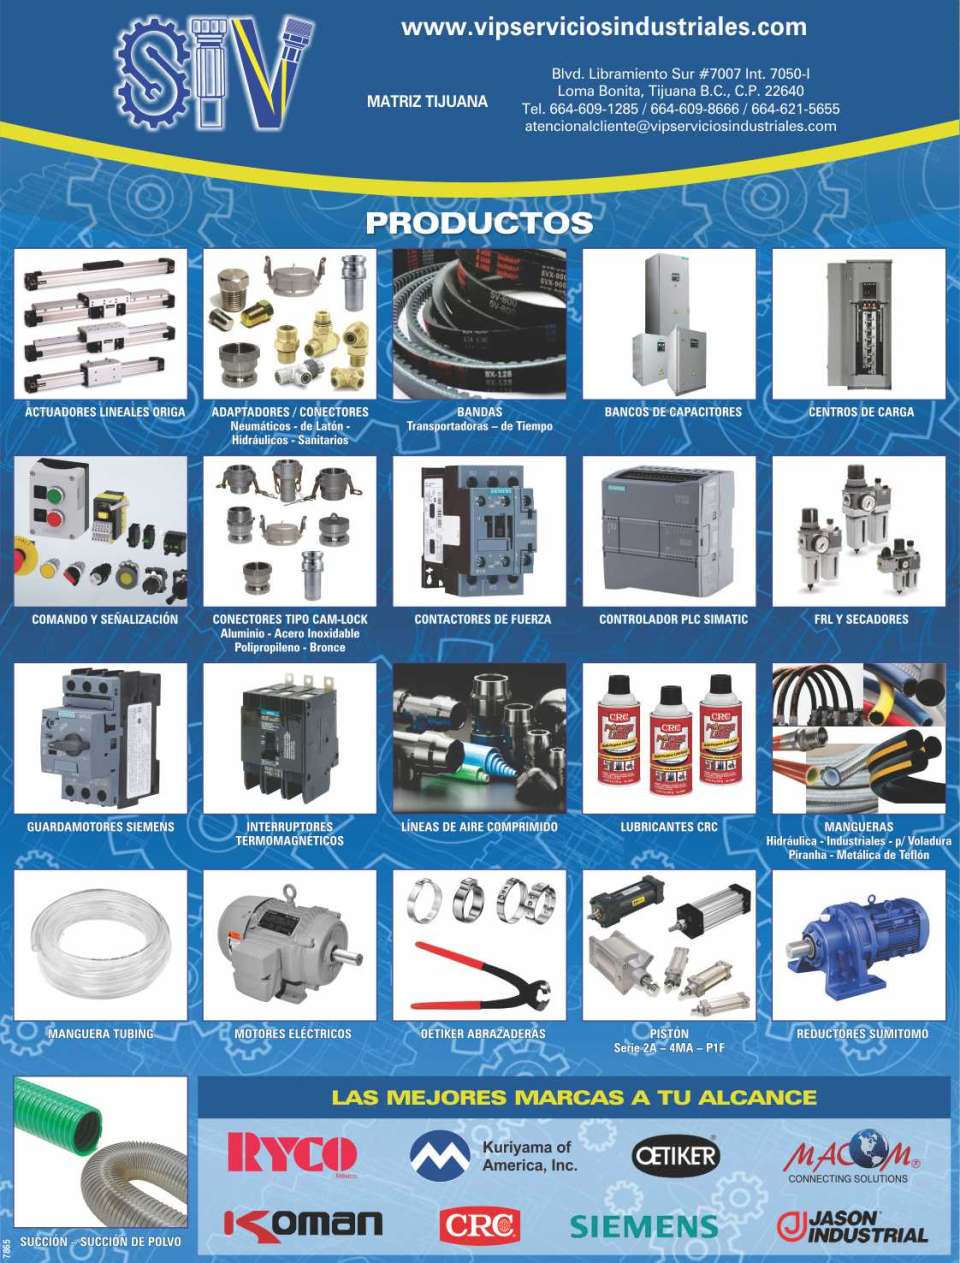 Hydraulic and industrial hoses, controls and electric motors, variators, starters, galvanized pipe, lubricants, bands, couplings, etc.